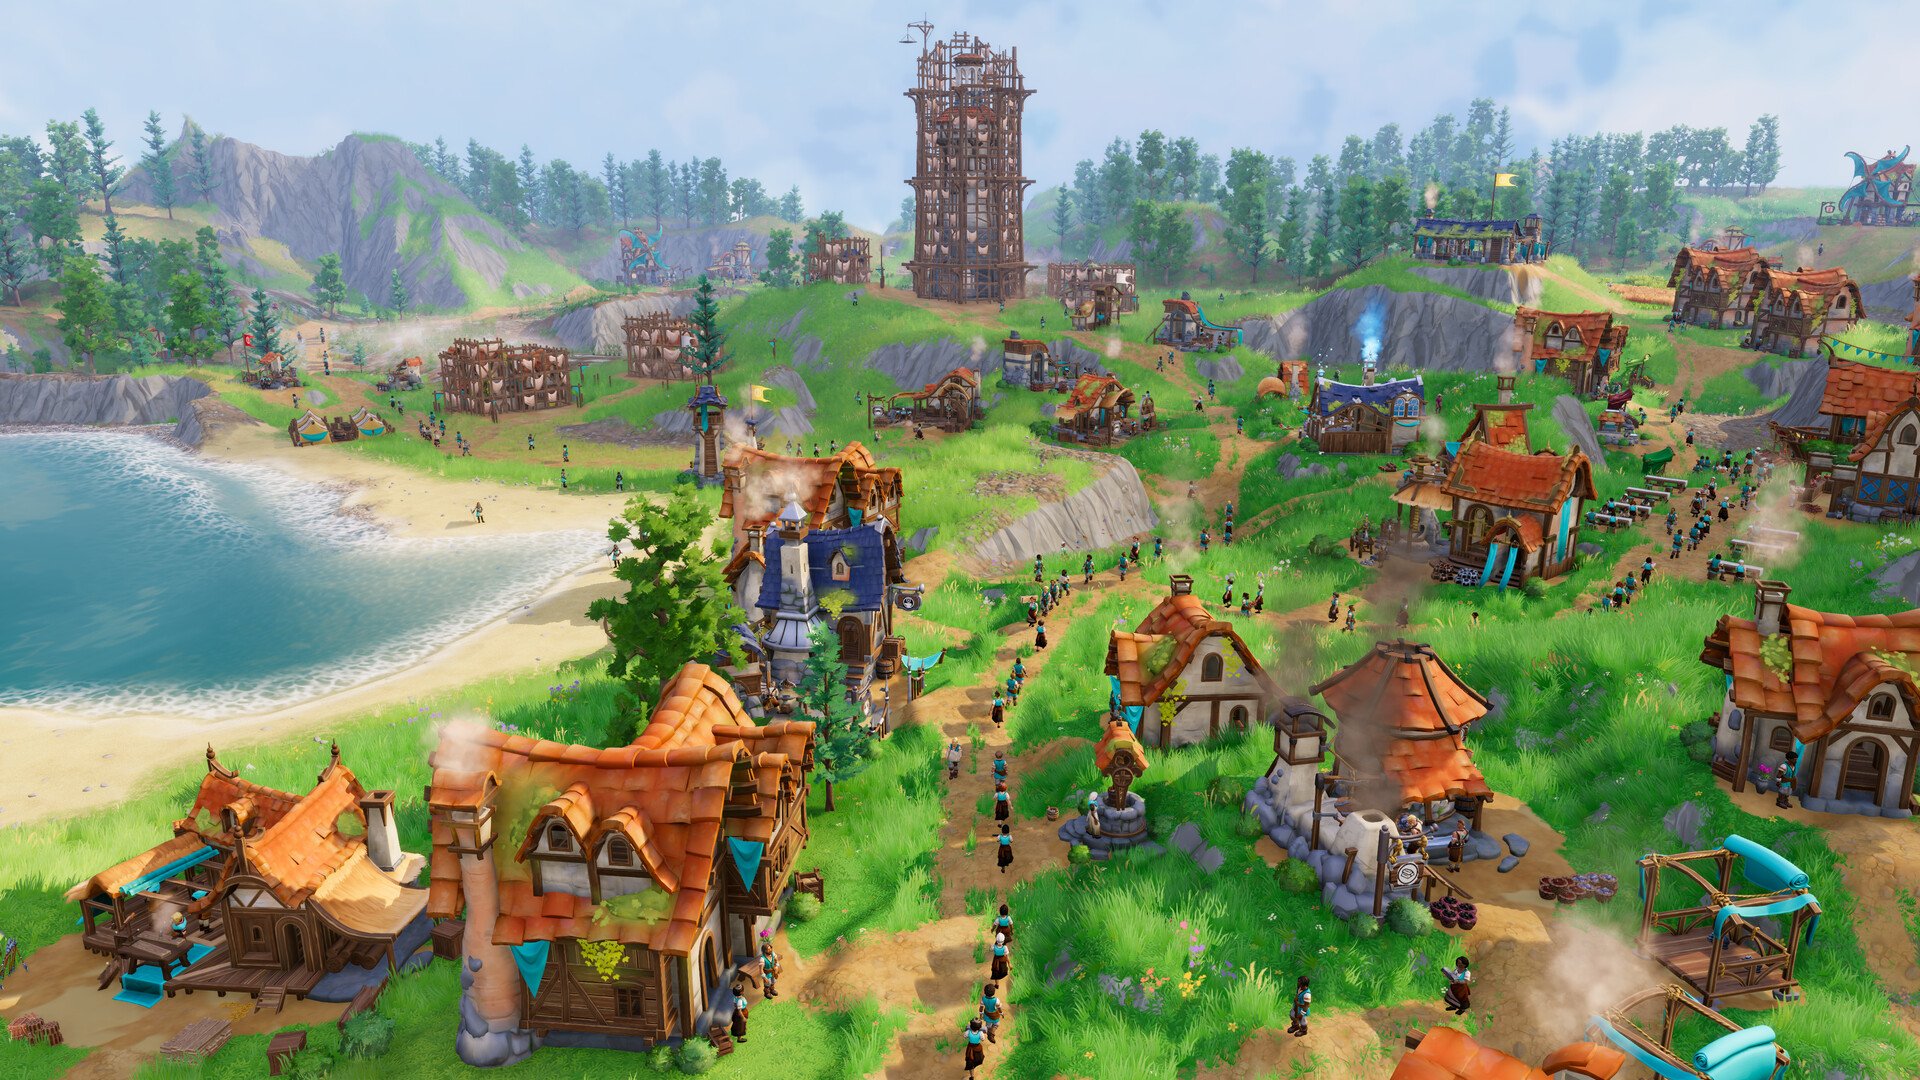 Pioneer игра. Pioneers of Pagonia PC. Pioneer PVP game. Scattered Tribes.